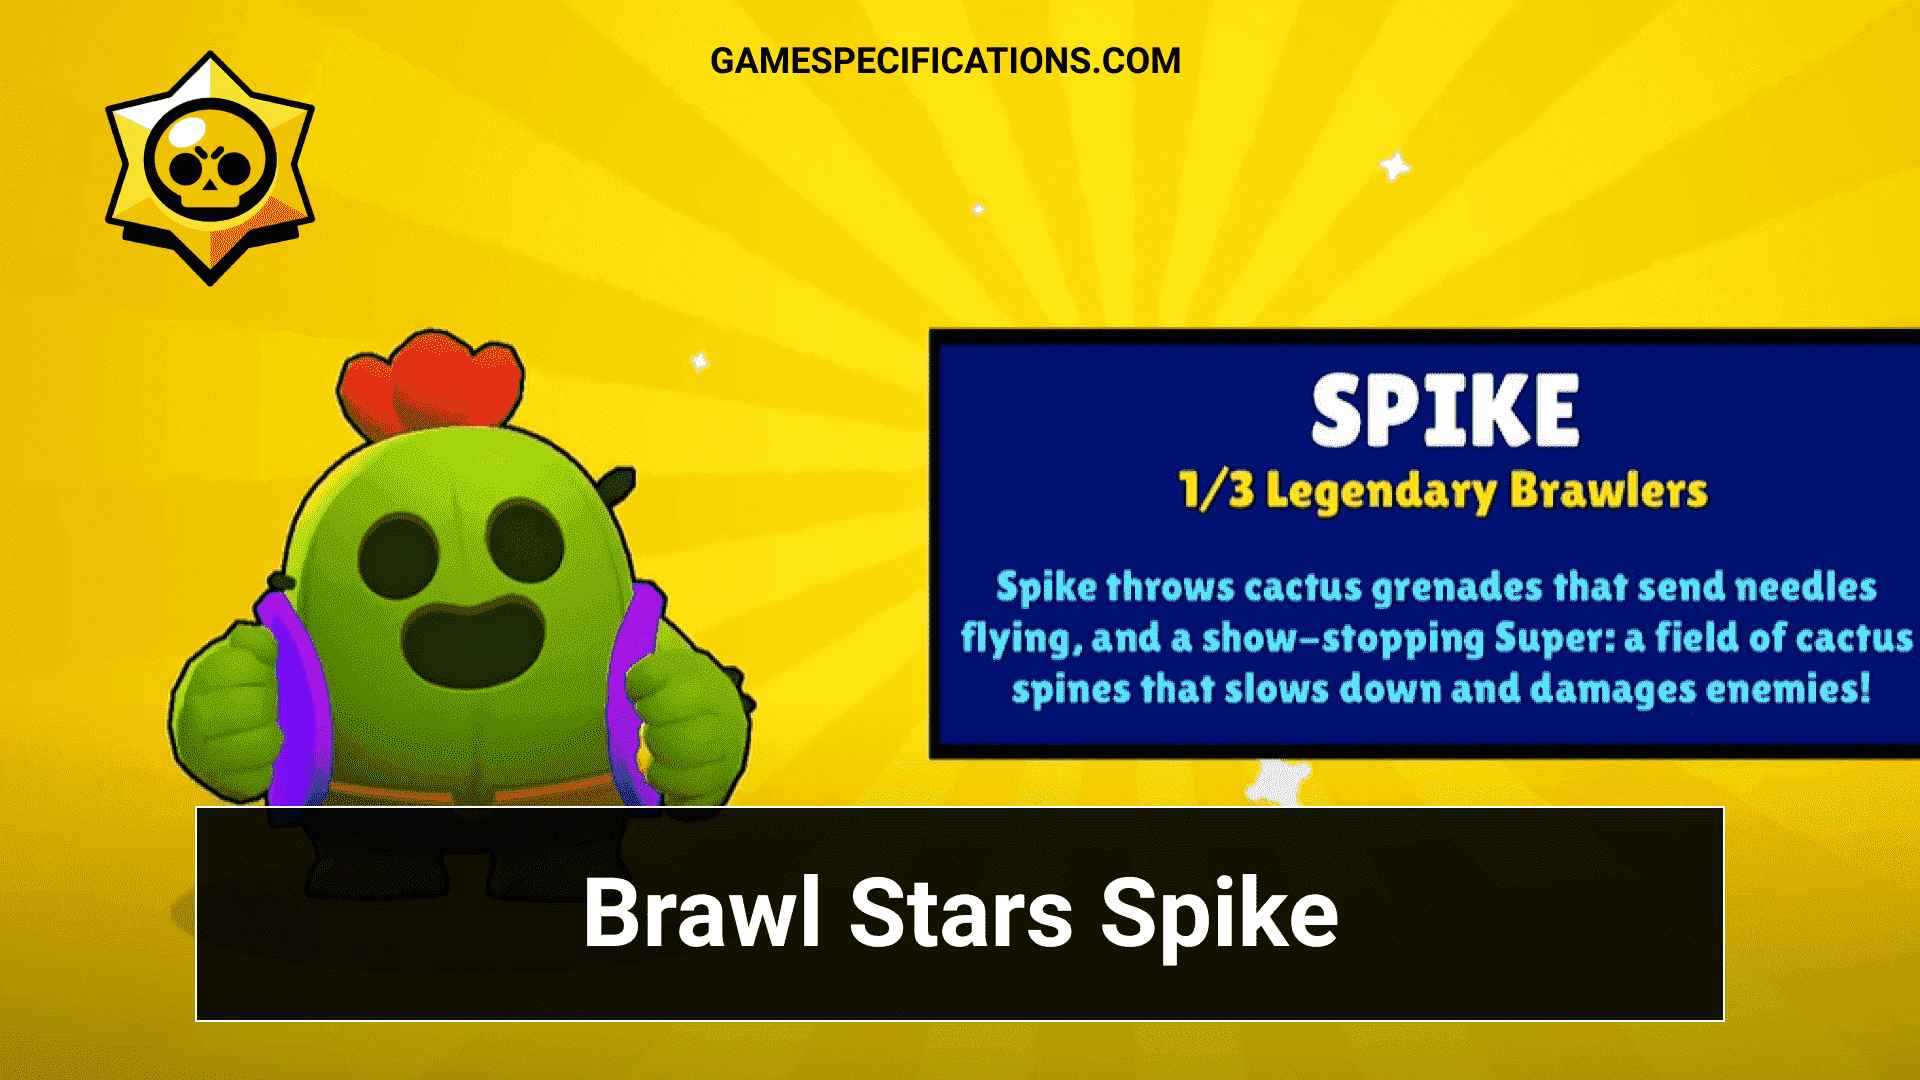 Brawl Stars Spike Introducing The Legendary Character In The Game Game Specifications - brawl stars new legendary